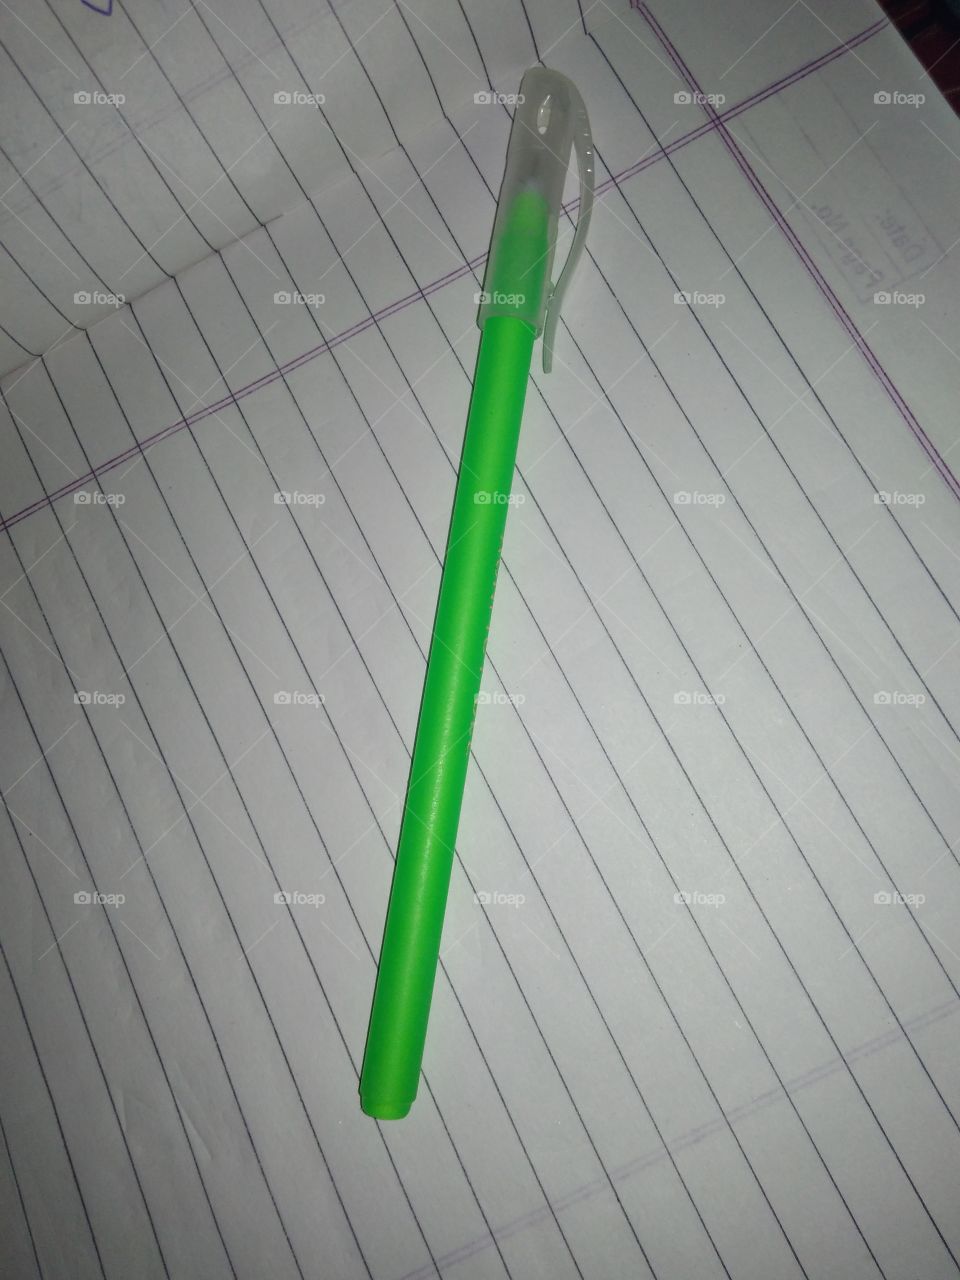 Hey this pen is very fast work and smooth it's maded by agni icy jel. 













It's very nice